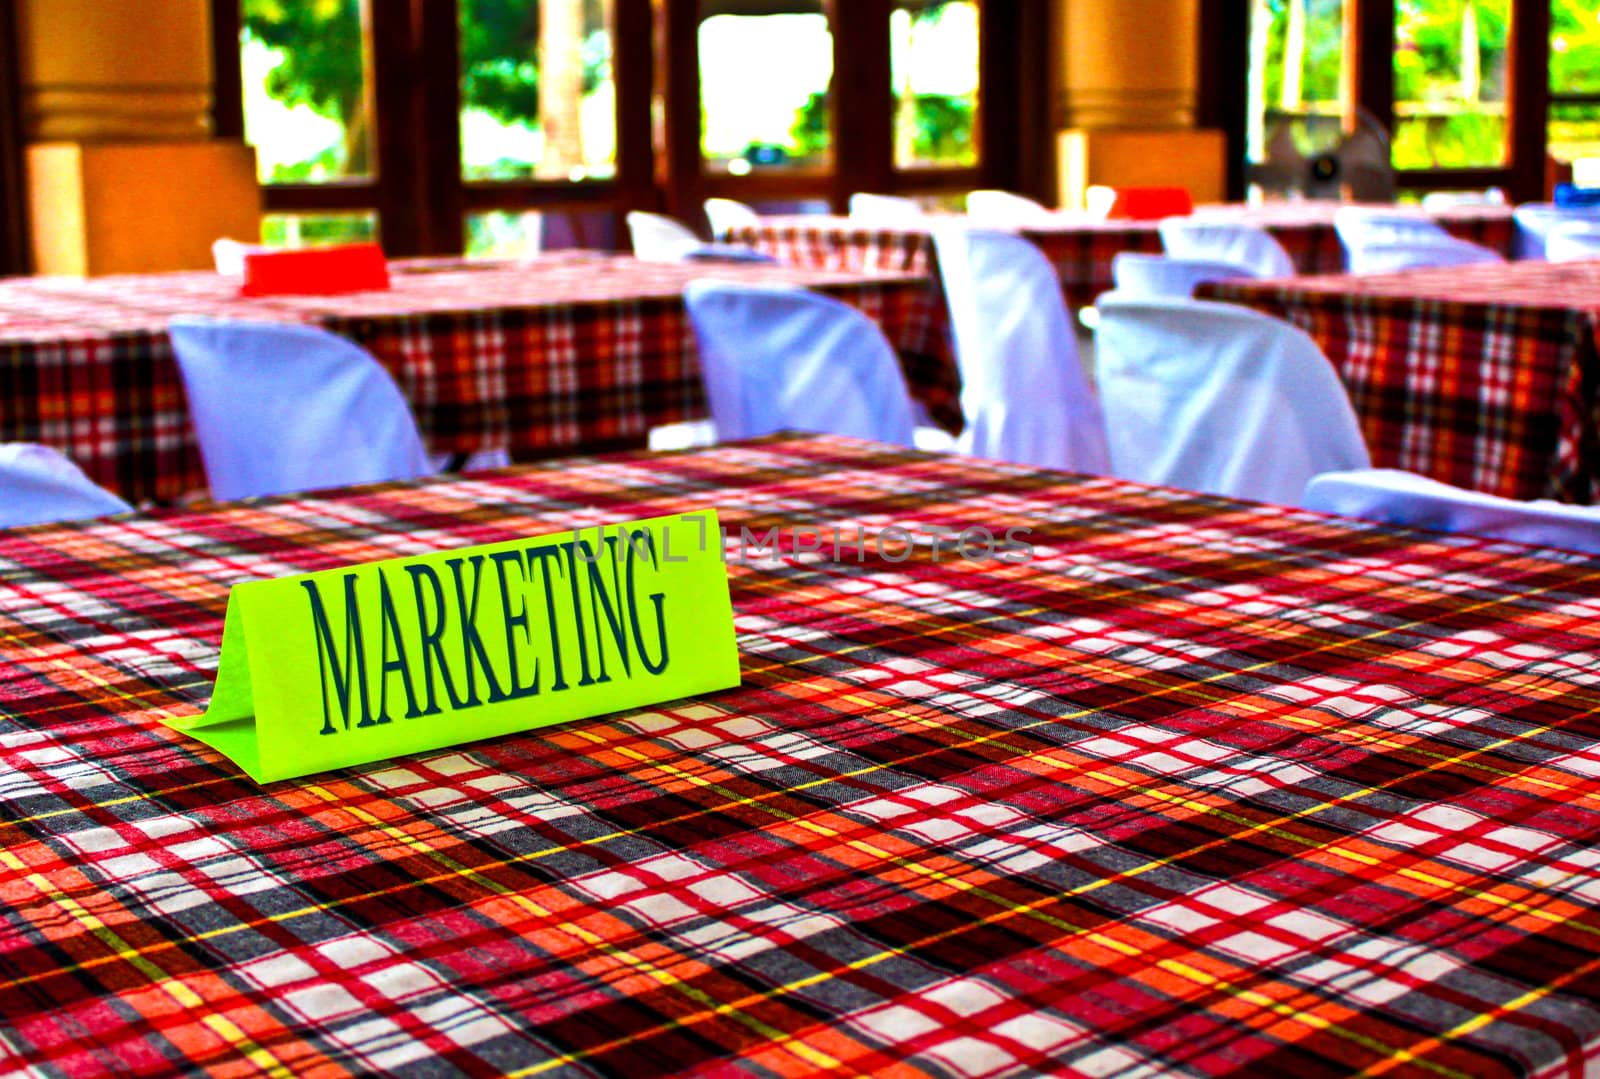 Marketing sign on top of the table during a business conference